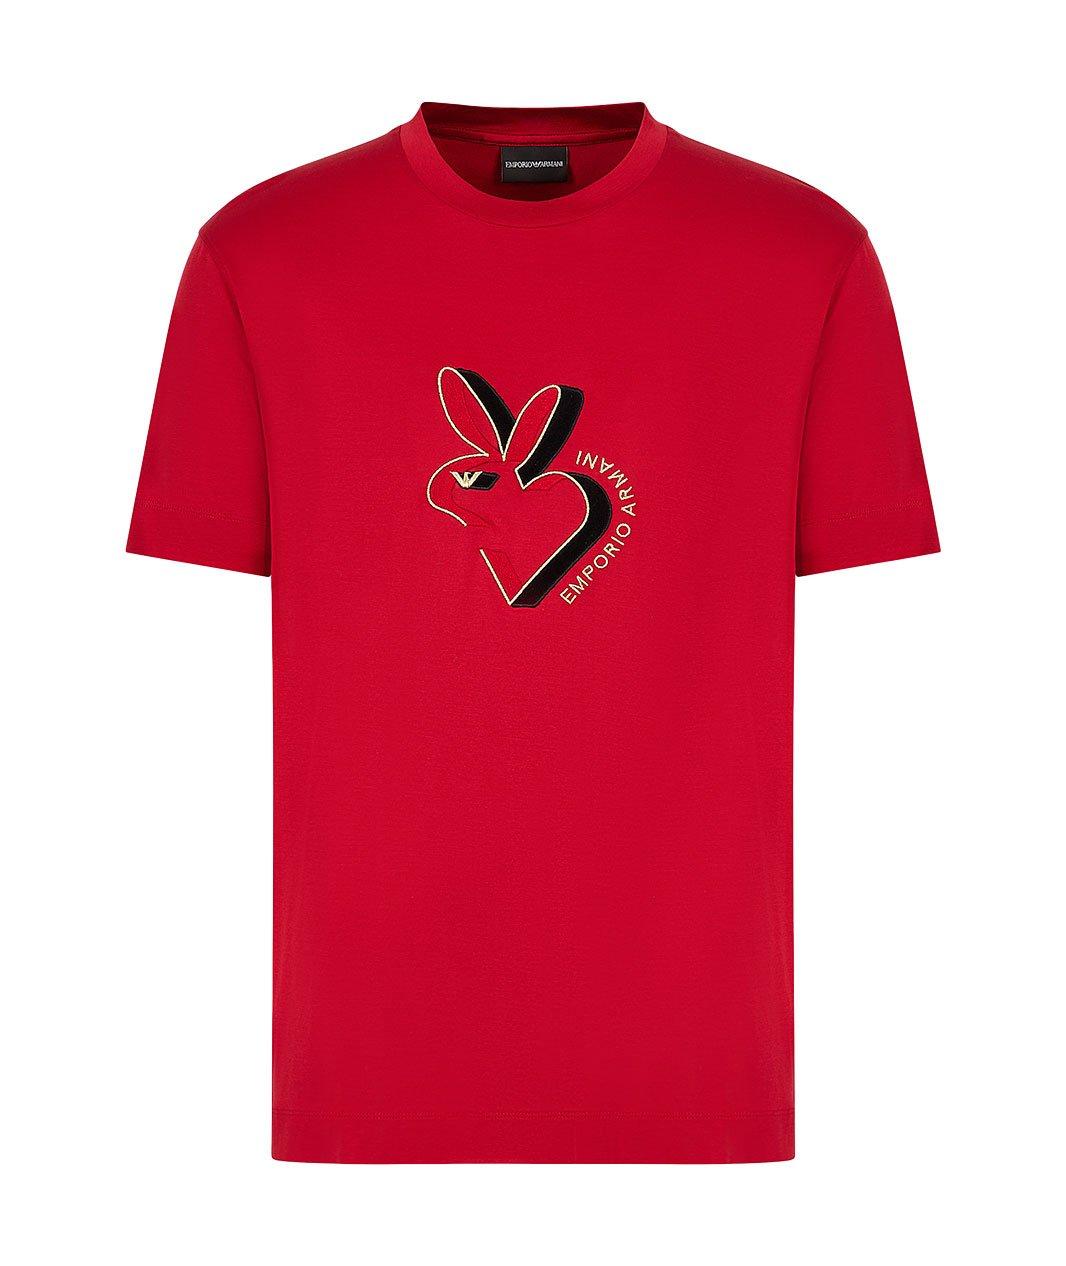 Jersey Lunar New Year Embroidery T-Shirt image 0